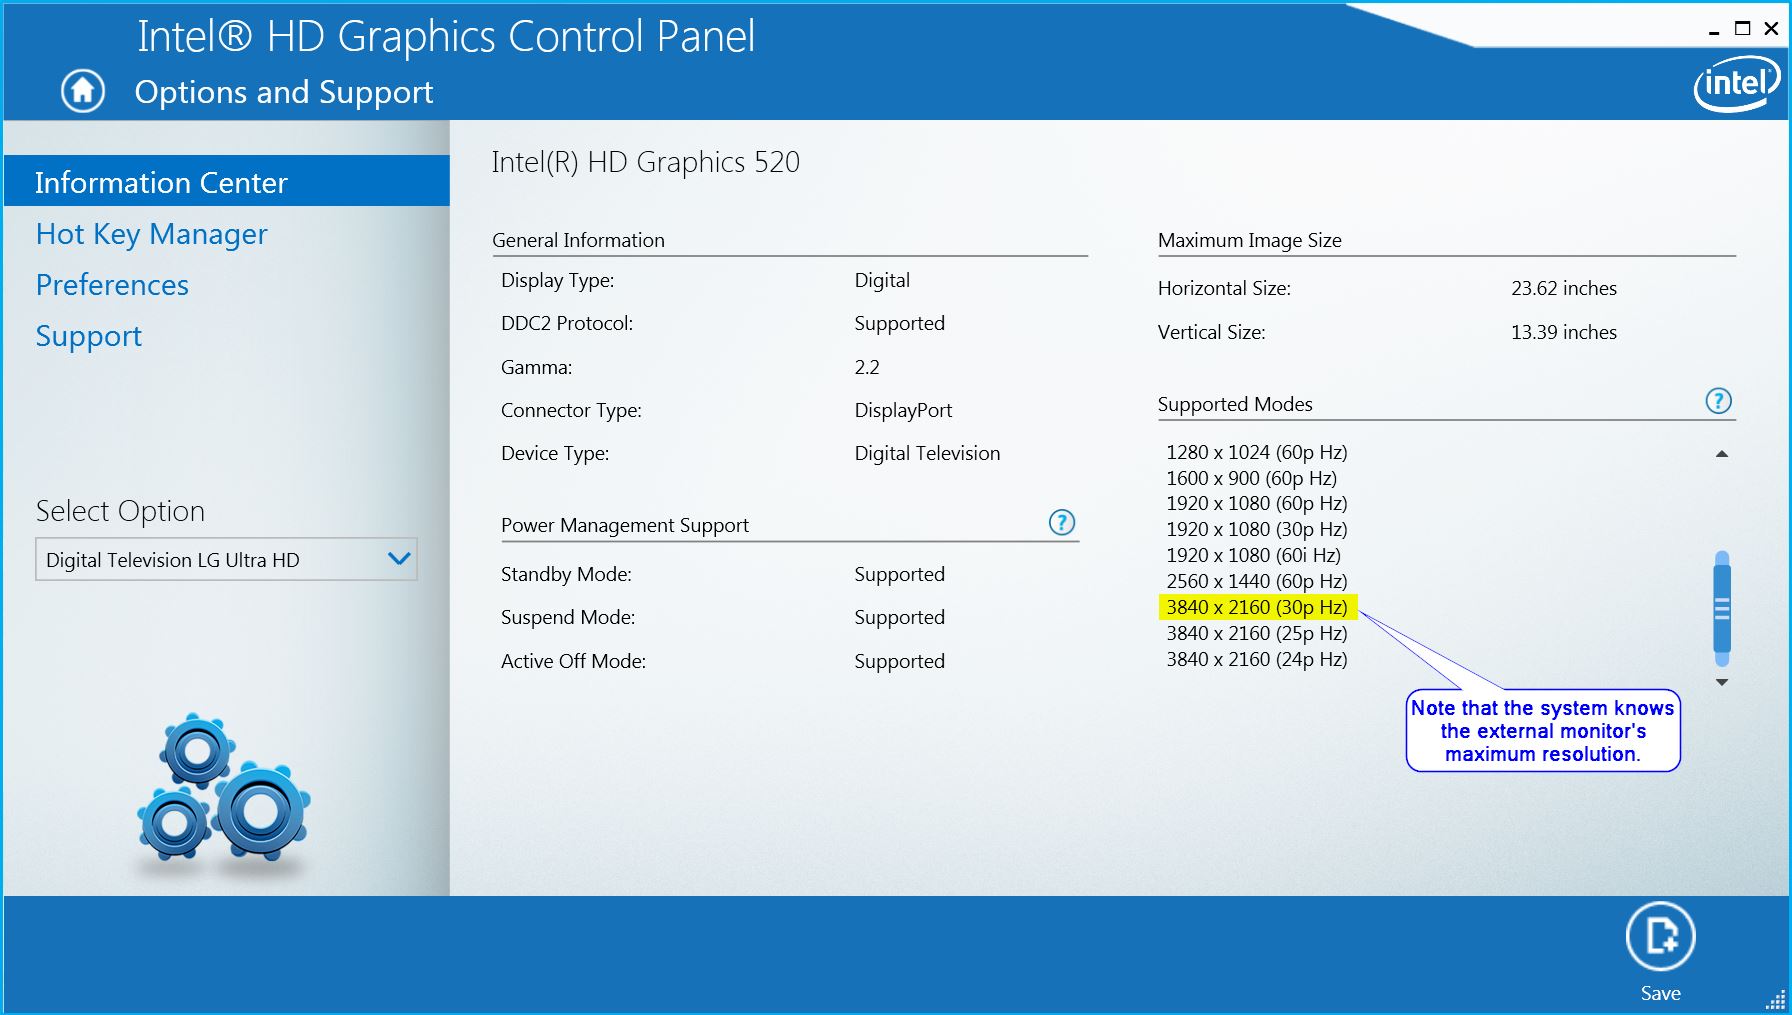 Intel HD Graphics 520 refuses to output 4K... sometimes. - Intel Communities